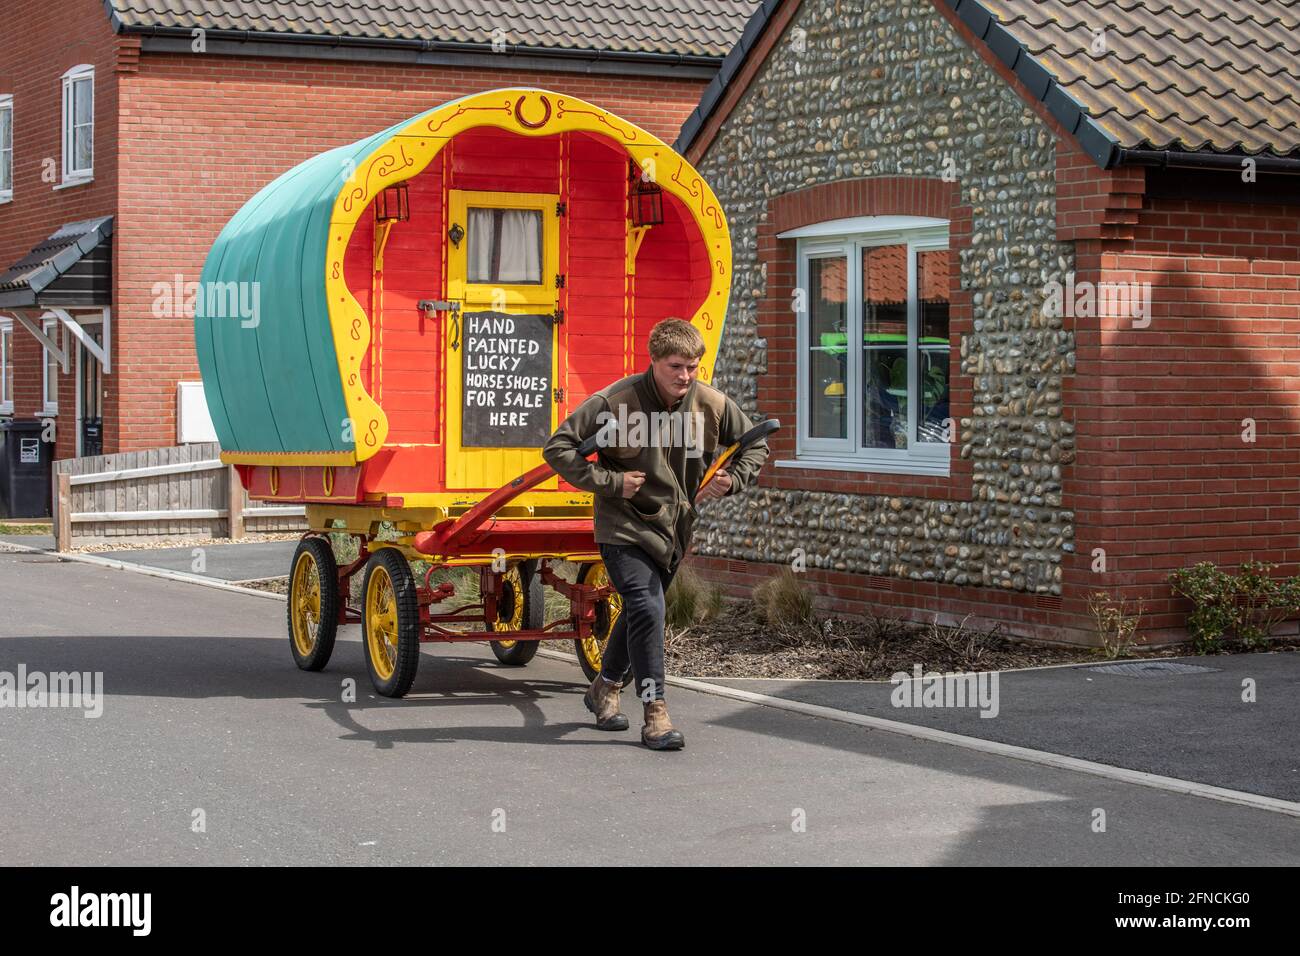 Freddy Coleman carries his antique horse cart looking for business selling painted horseshoes in Bacton, Norfolk, England, United Kingdom Stock Photo